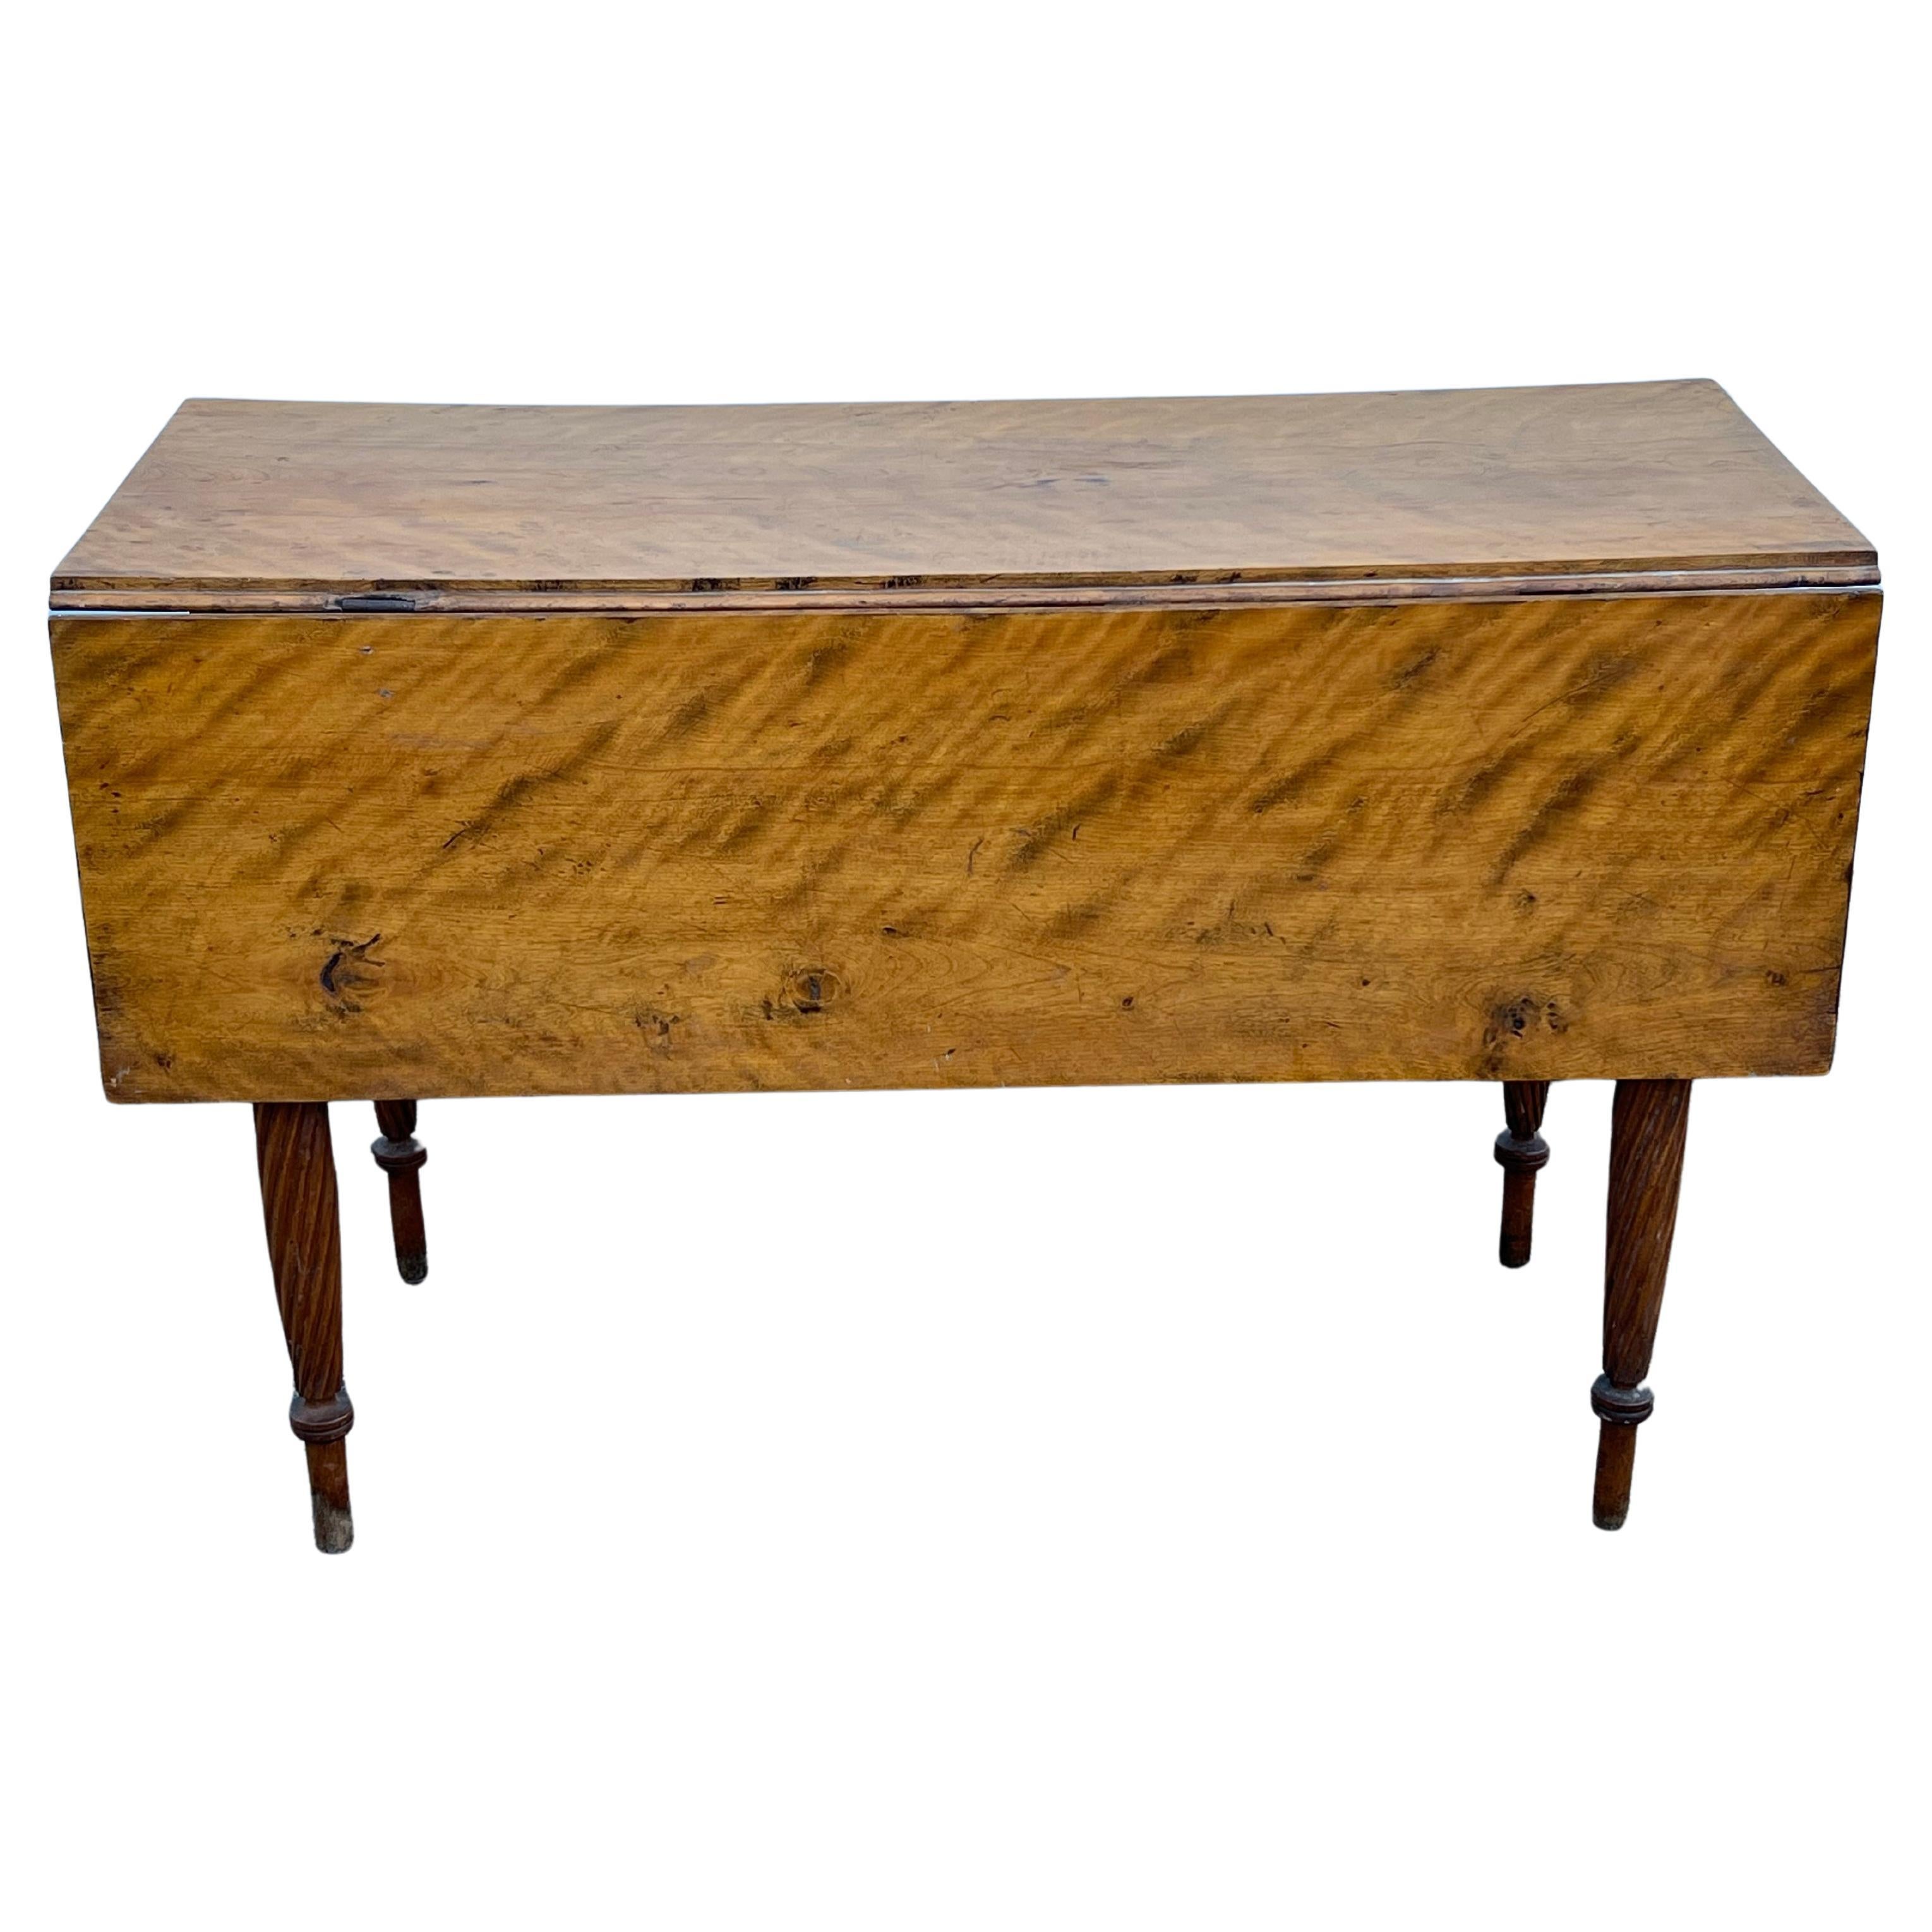 19th Century Flame Birch Drop Leaf Table with Spiral Carved Legs For Sale